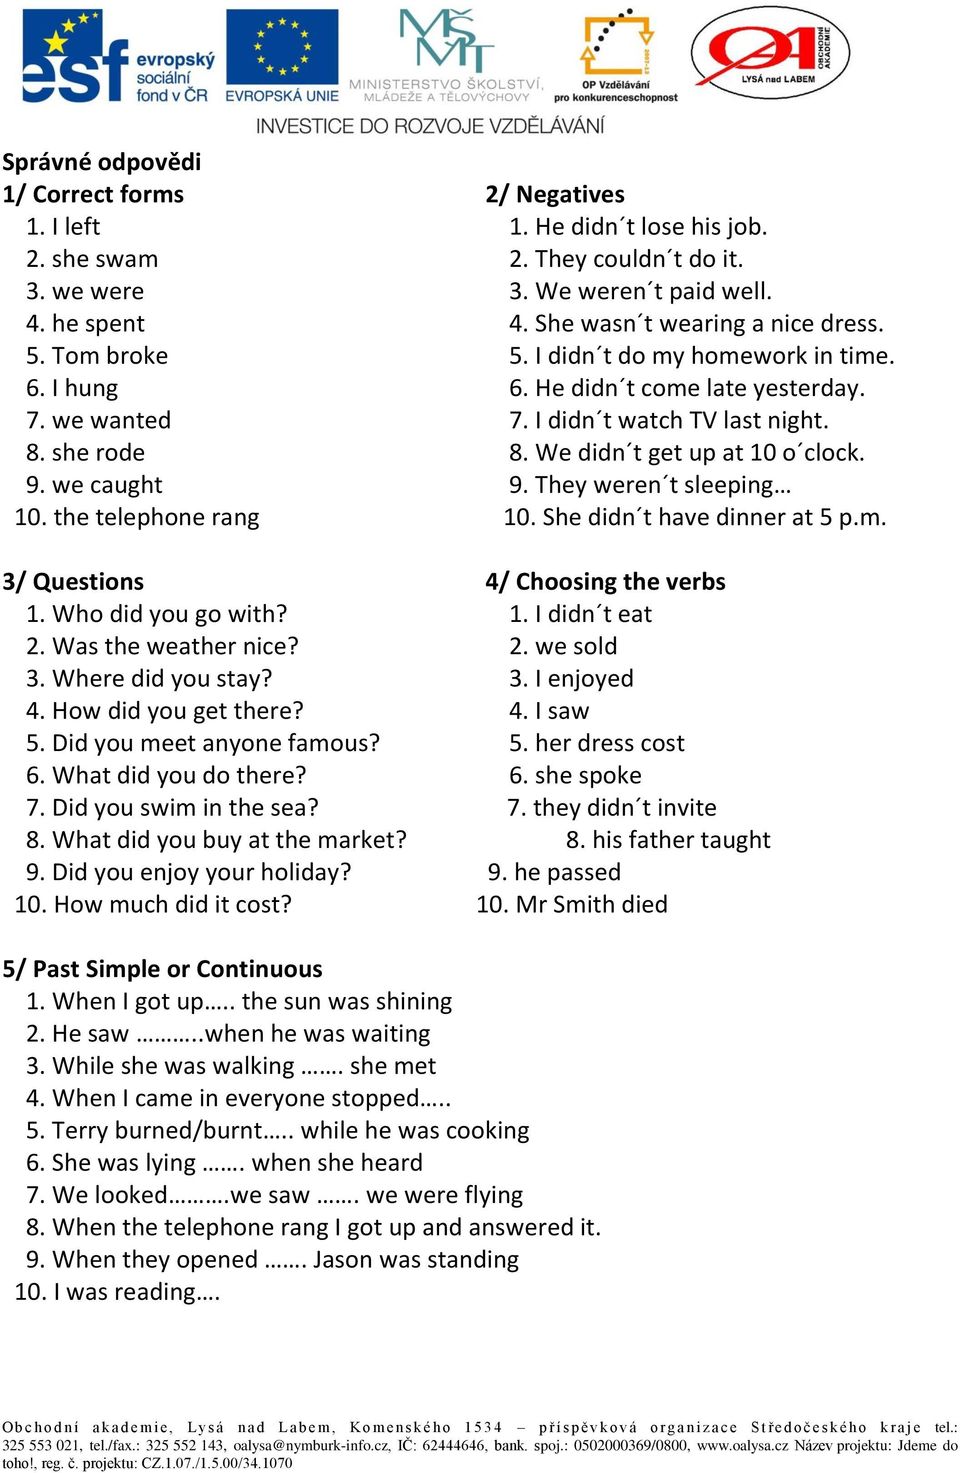 We didn t get up at 10 o clock. 9. we caught 9. They weren t sleeping 10. the telephone rang 10. She didn t have dinner at 5 p.m. 3/ Questions 4/ Choosing the verbs 1. Who did you go with? 1. I didn t eat 2.